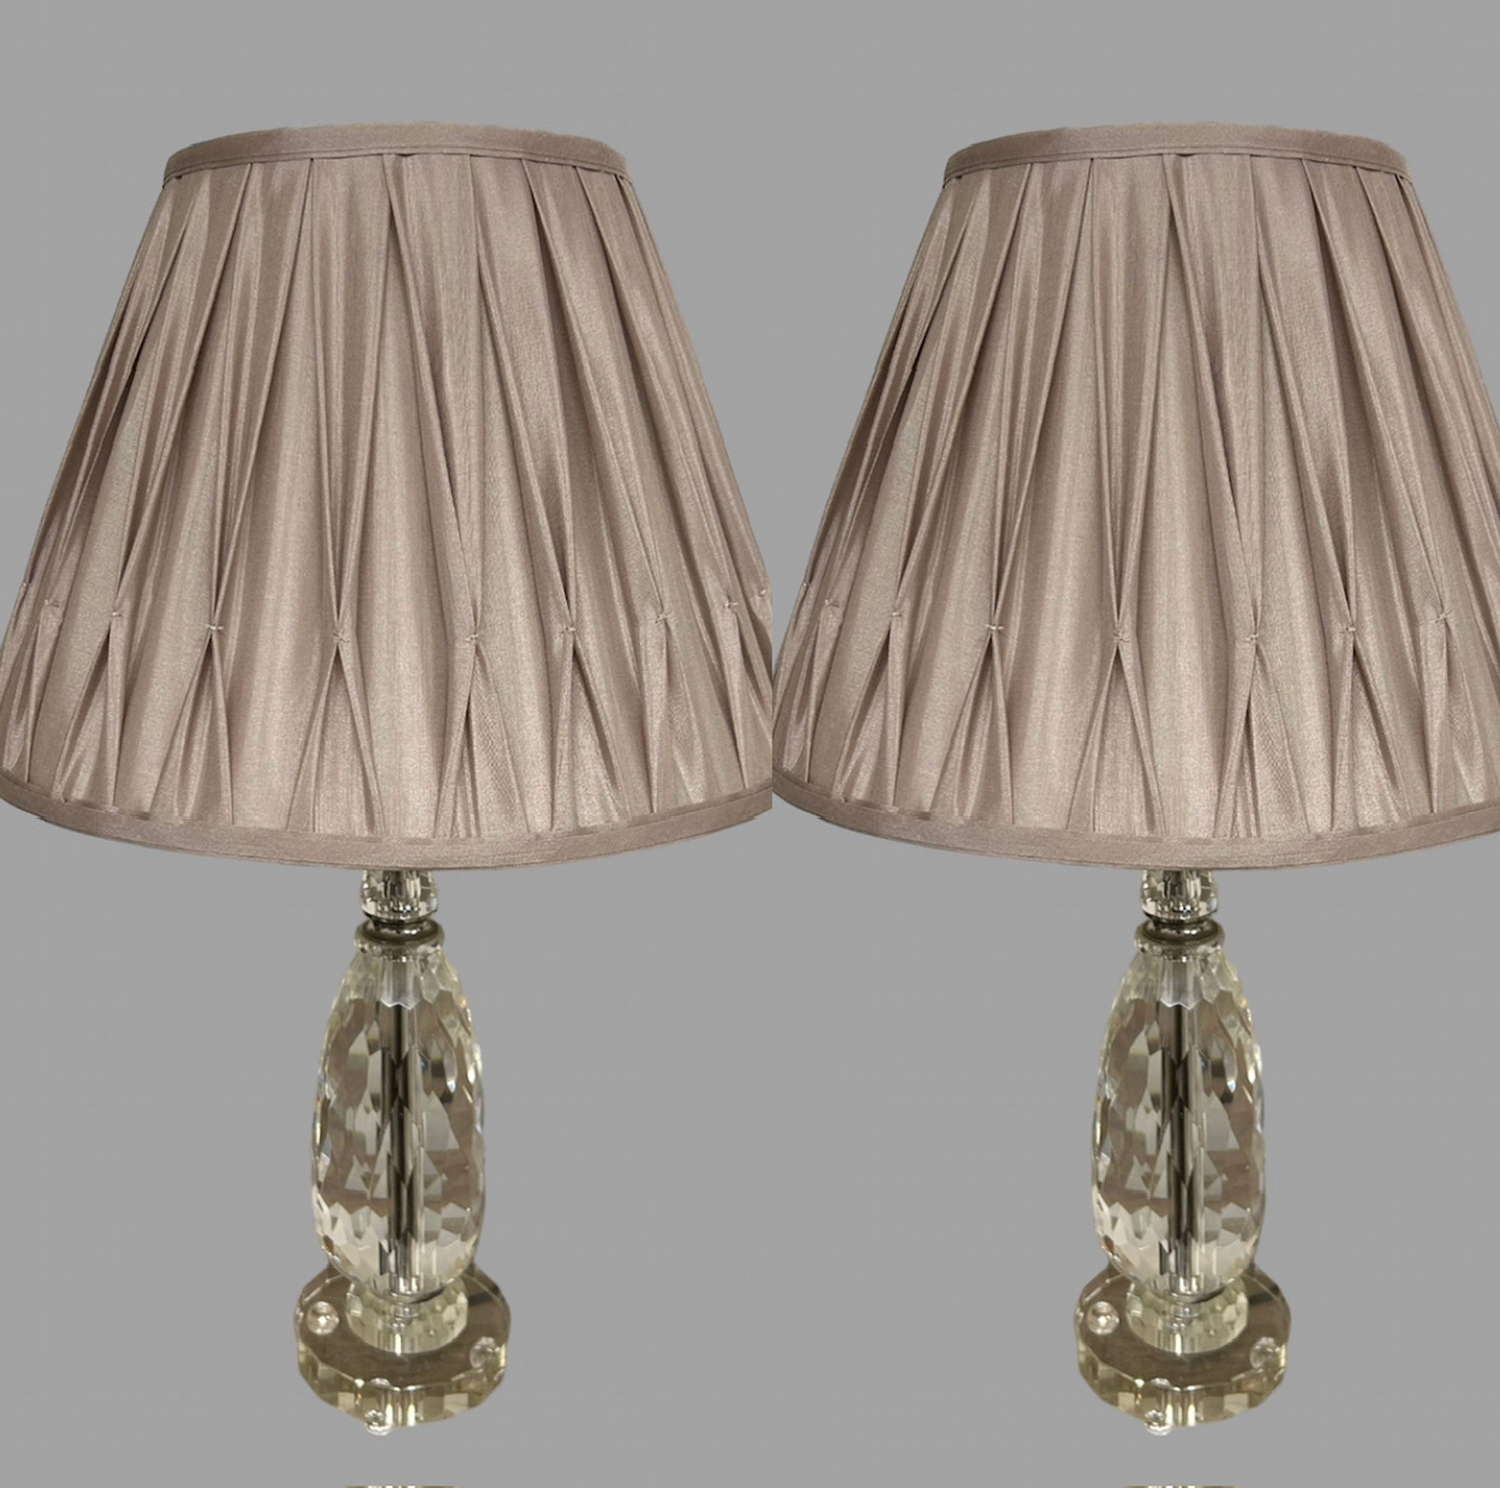 A Pair of Elegant Cut Glass Table Lamps